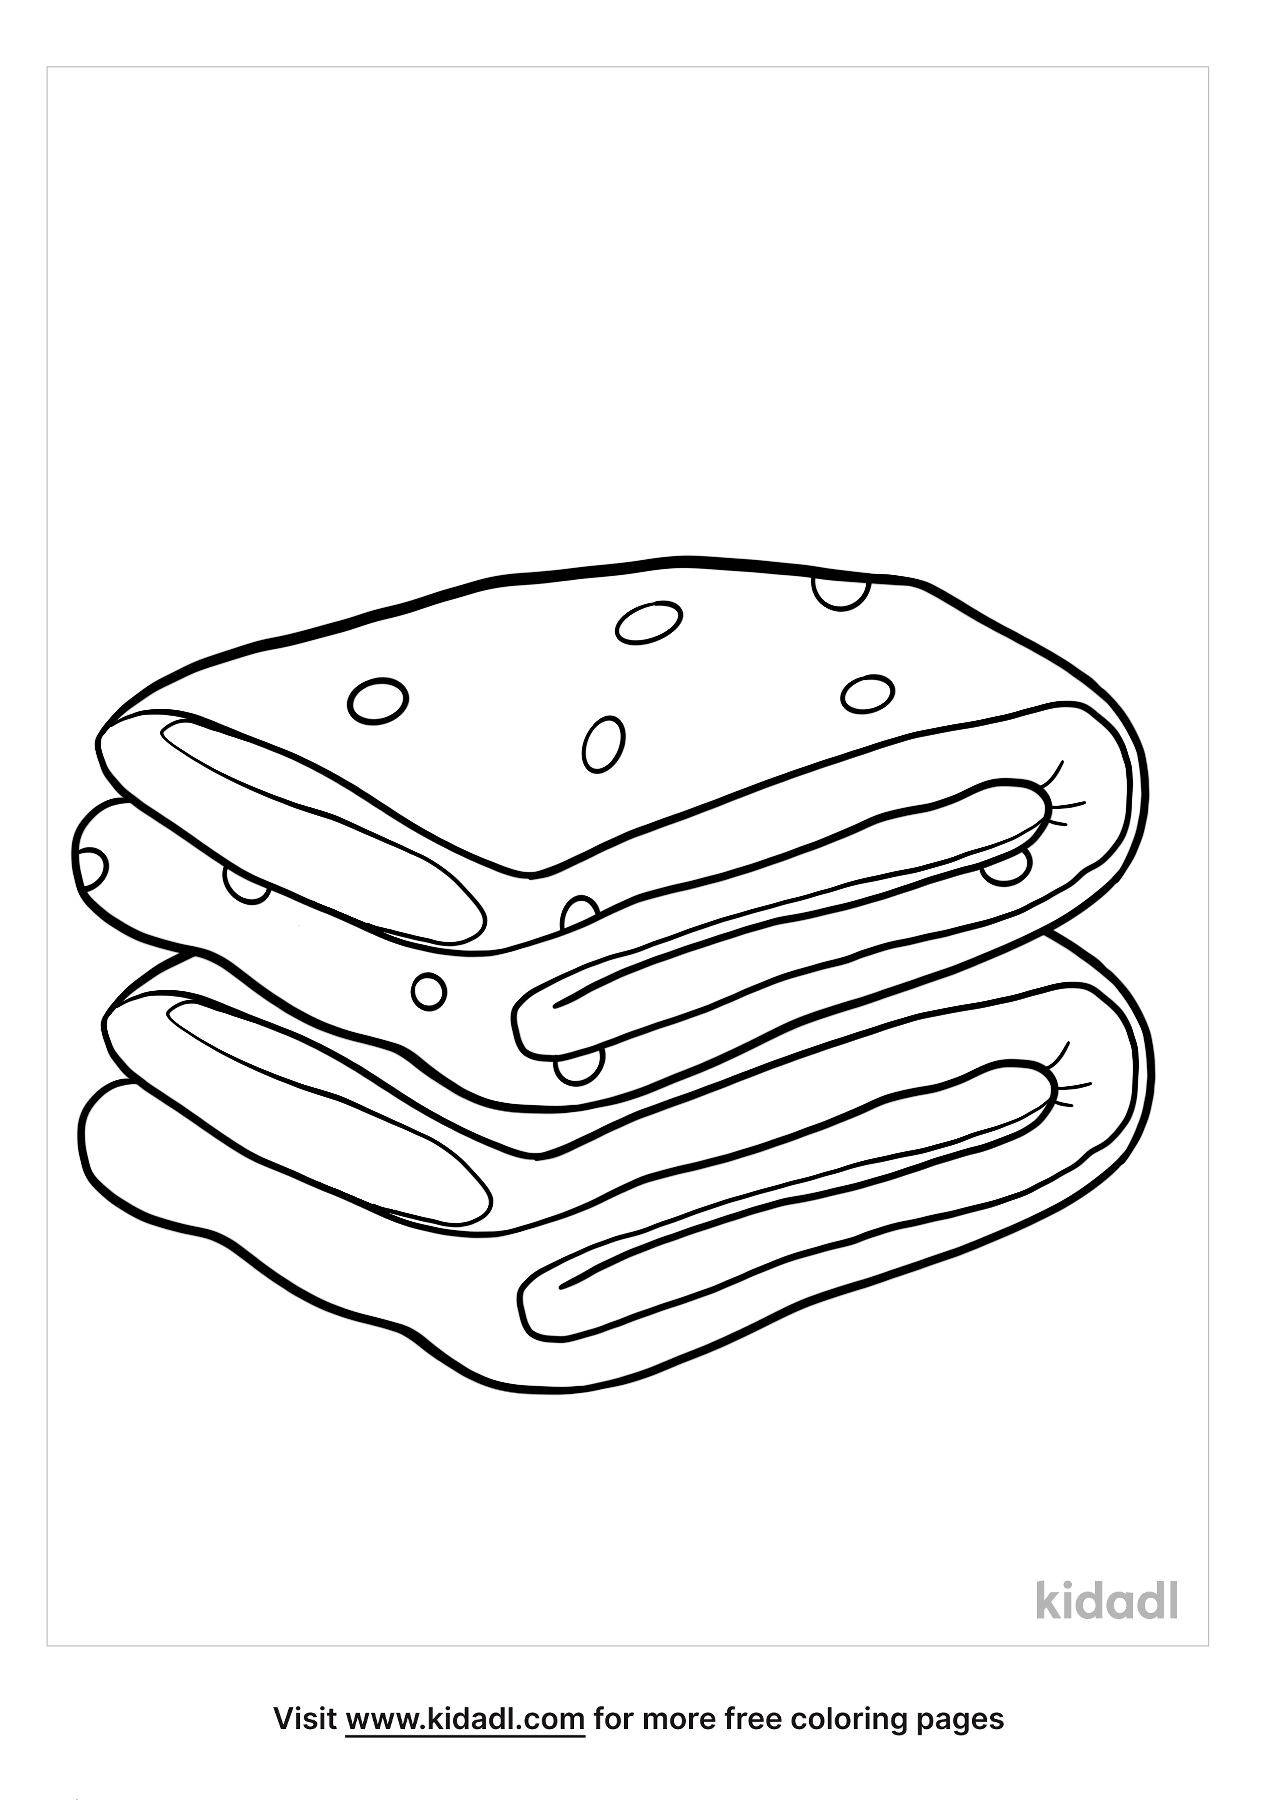 Blanket Coloring Pages | Free At Home Coloring Pages | Kidadl